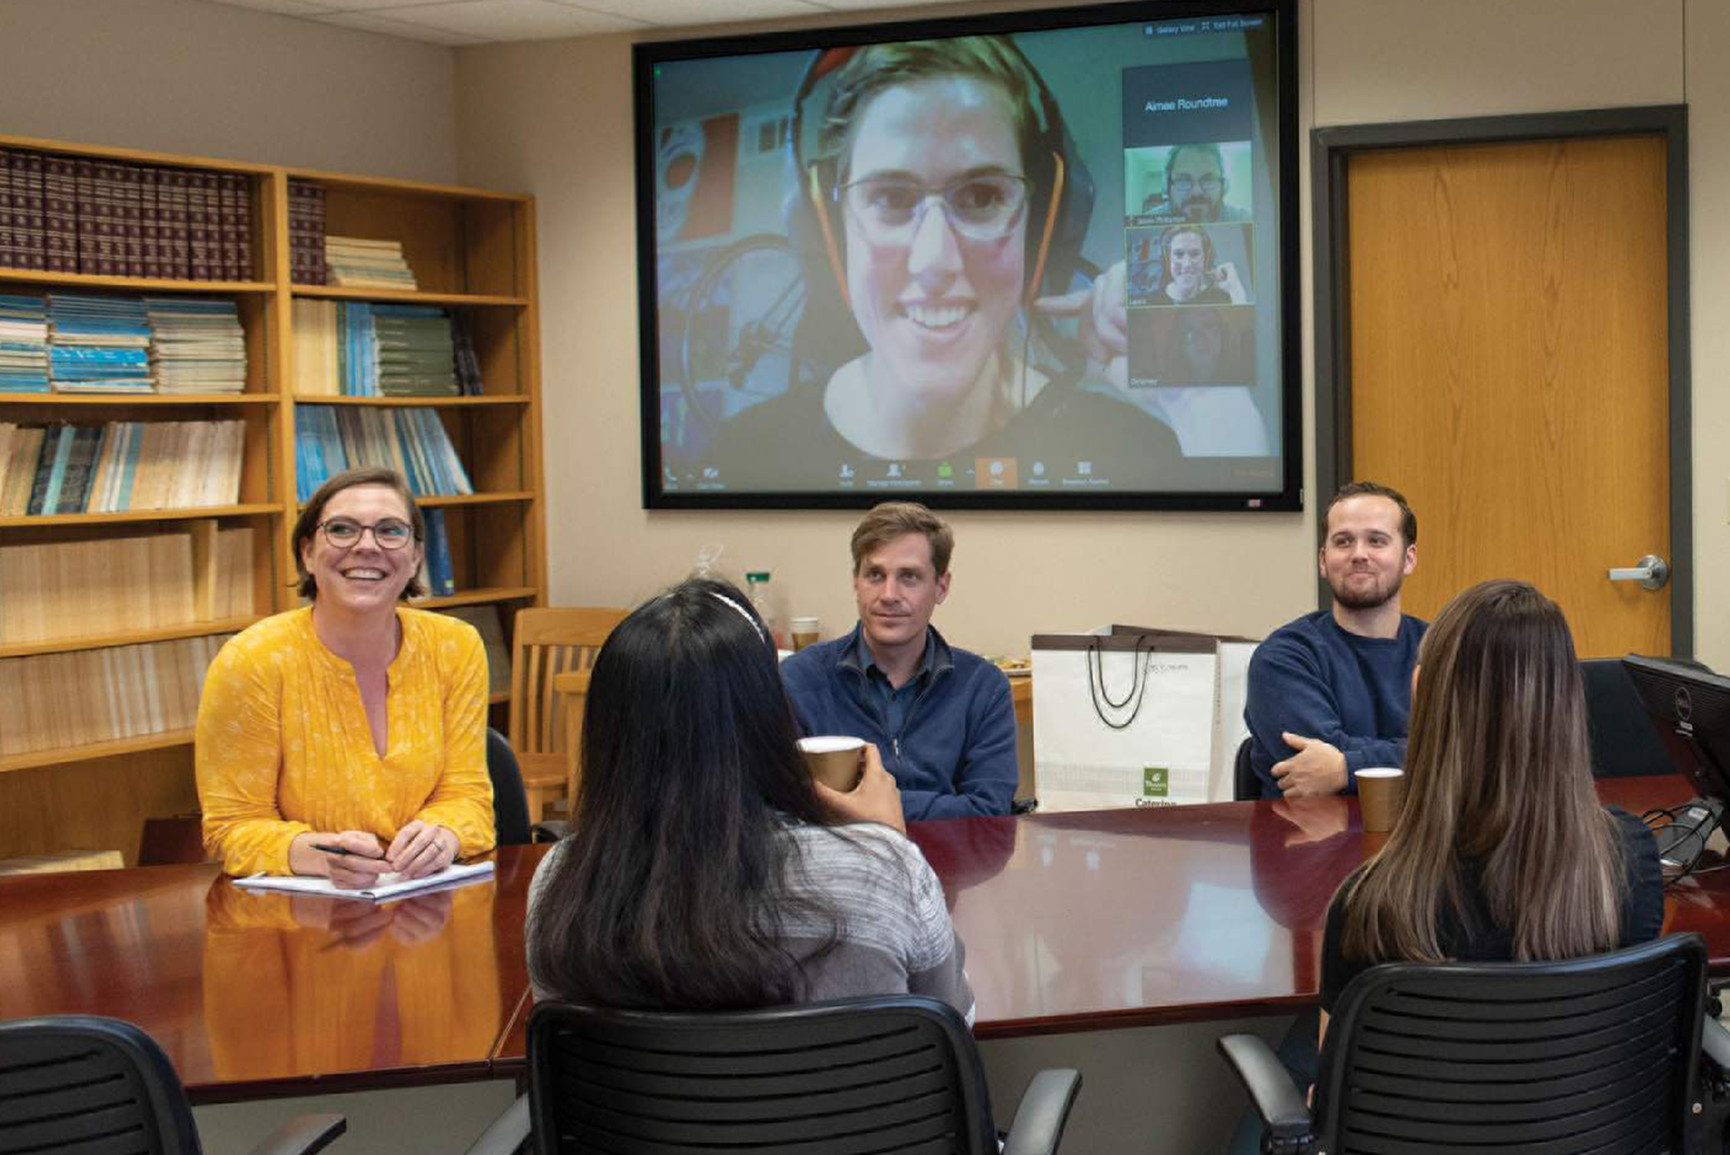 Students in conference room on a video call